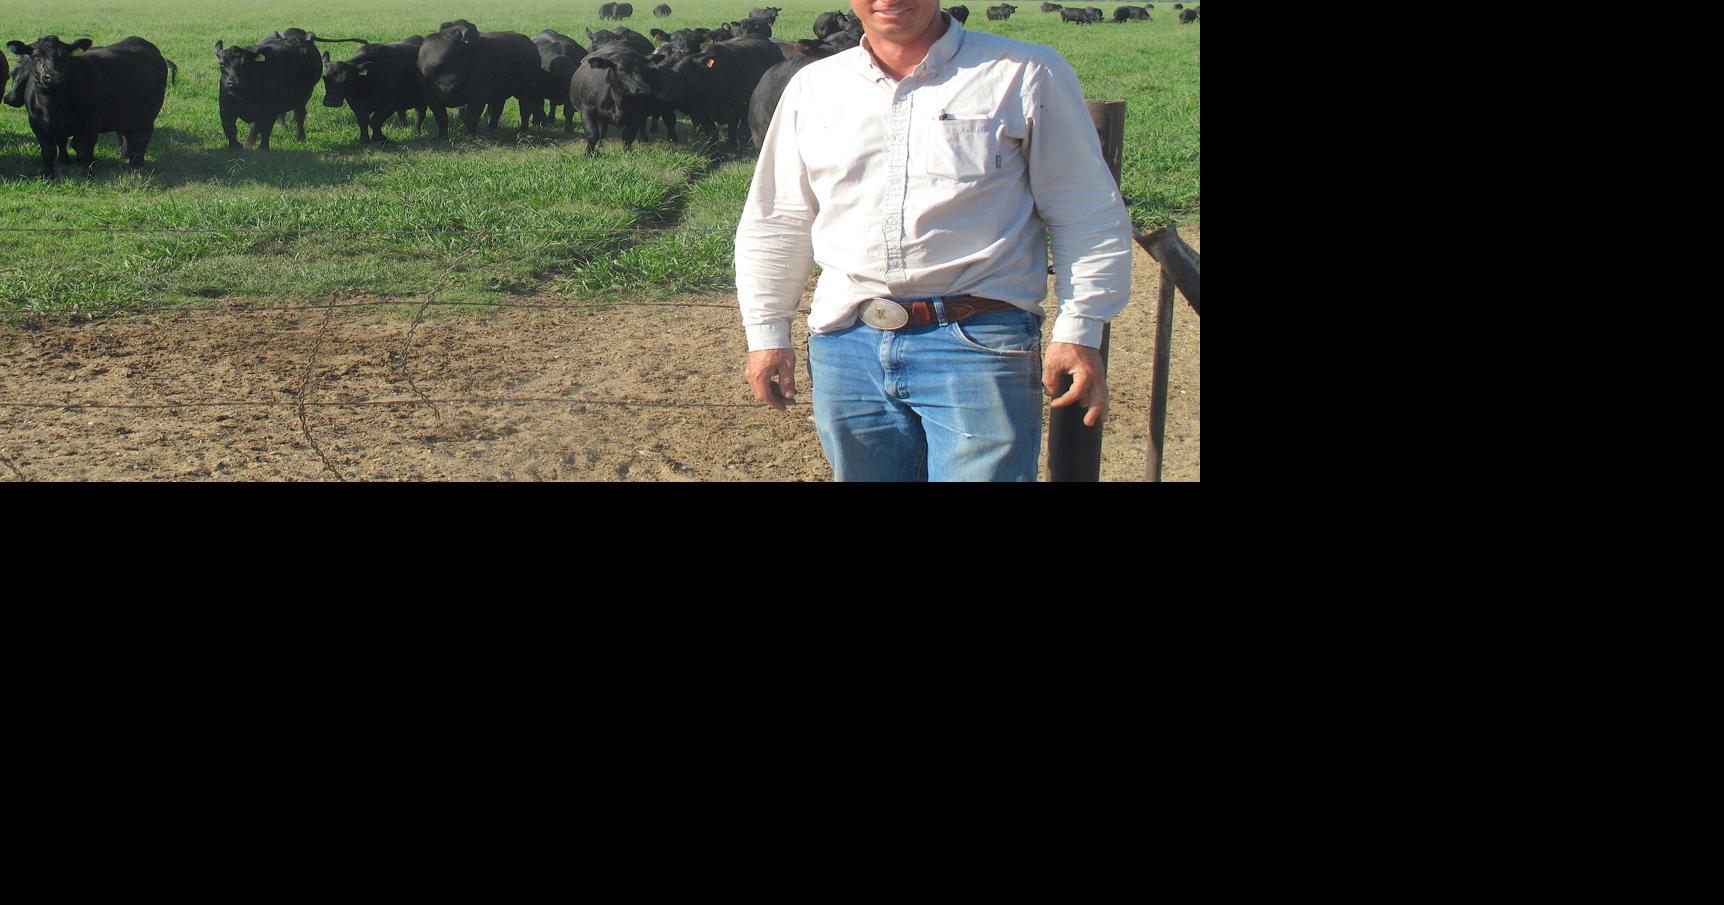 Tehama Angus Ranch: A cattle industry icon | Corning Observer